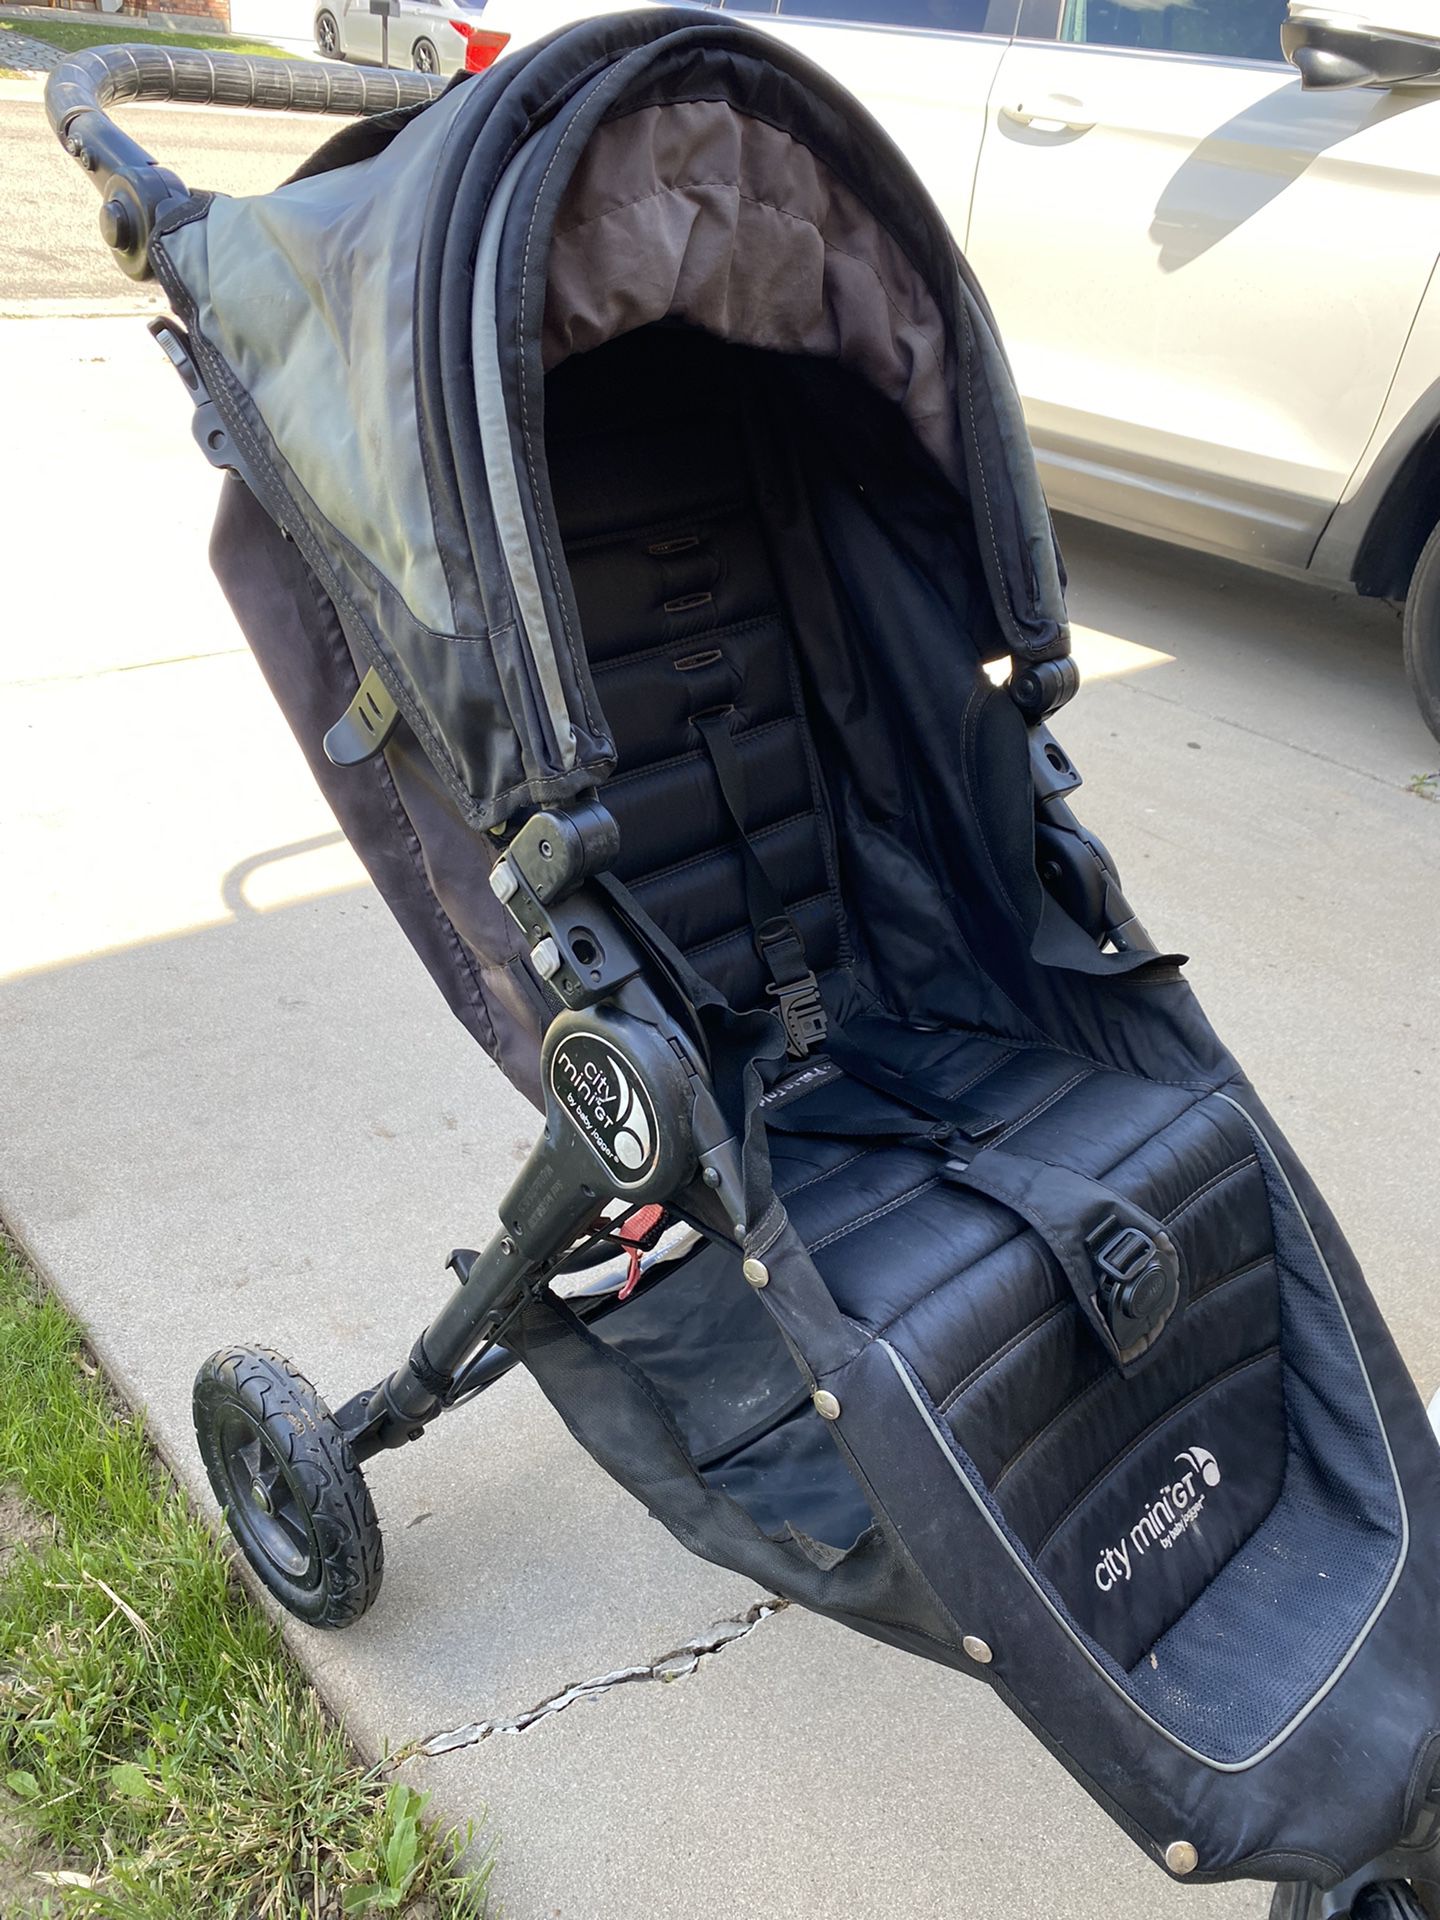 Teenager Prisnedsættelse Rust City Mini Gt By Baby Jogger for Sale in Boise, ID - OfferUp